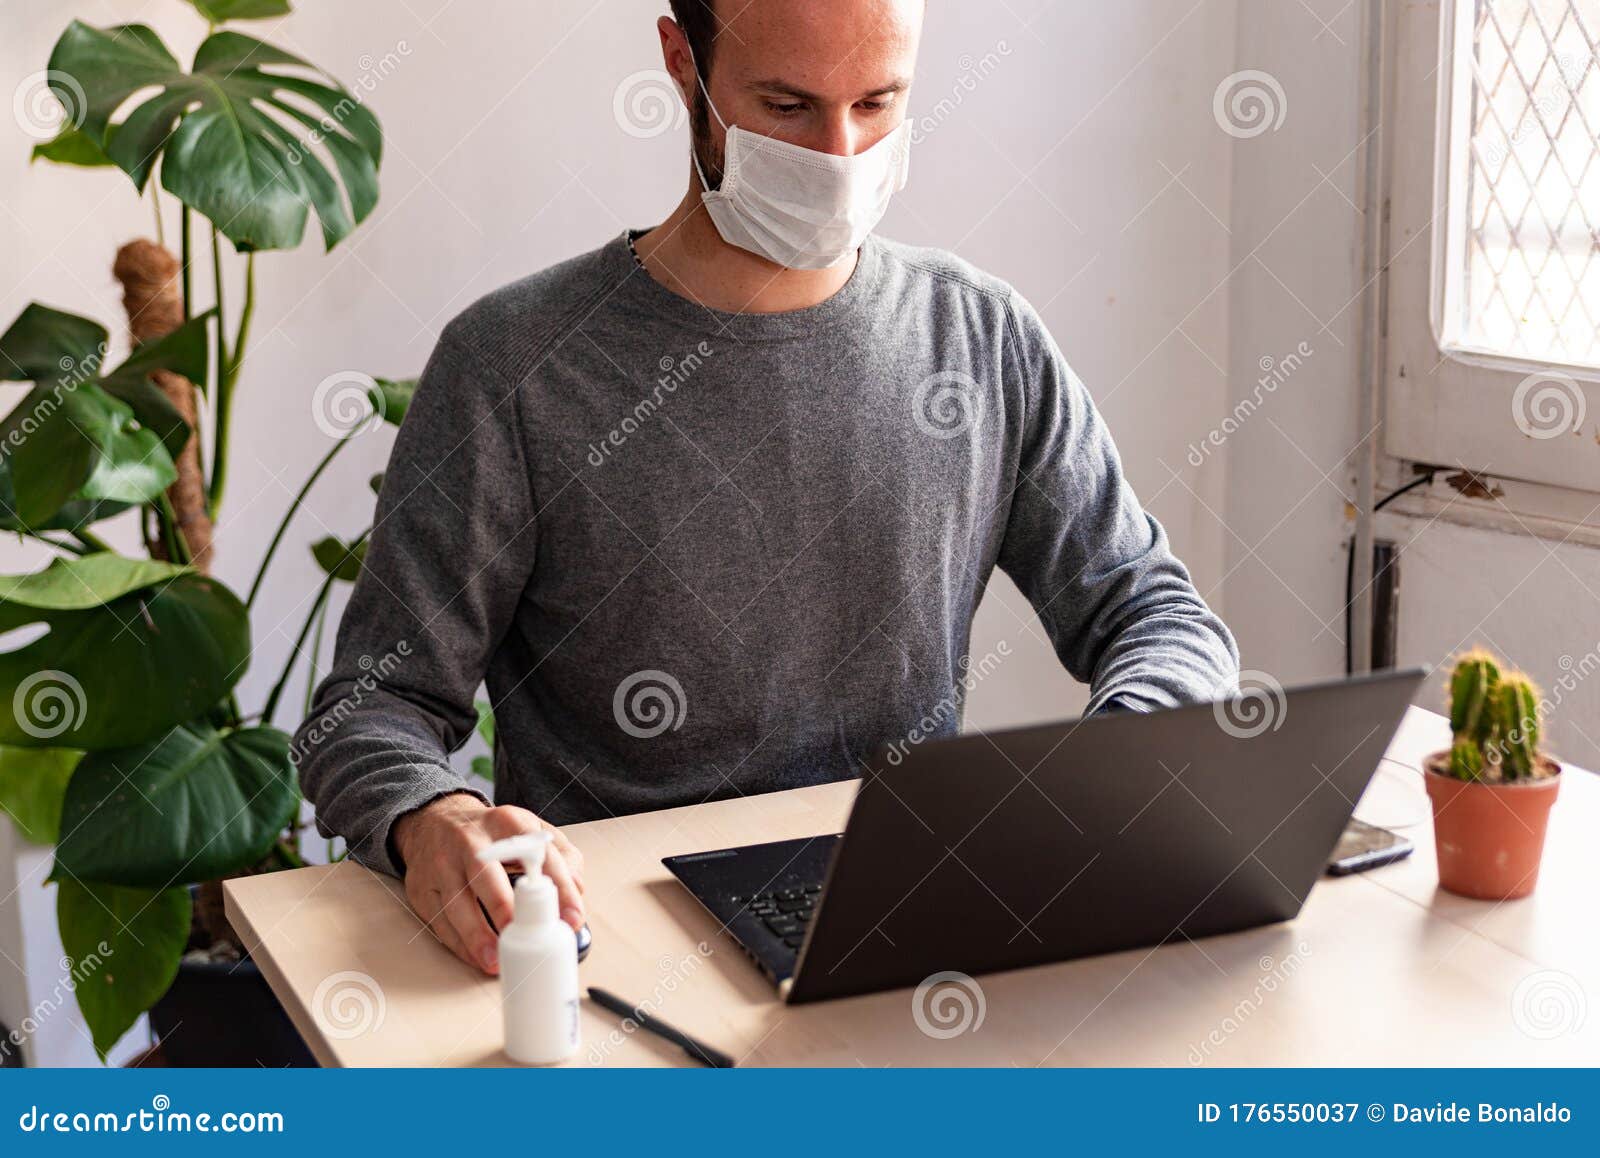 young man wearing medical face mask at work from home due to corona virus outbreak with laptop and mobile phone on wooden table,